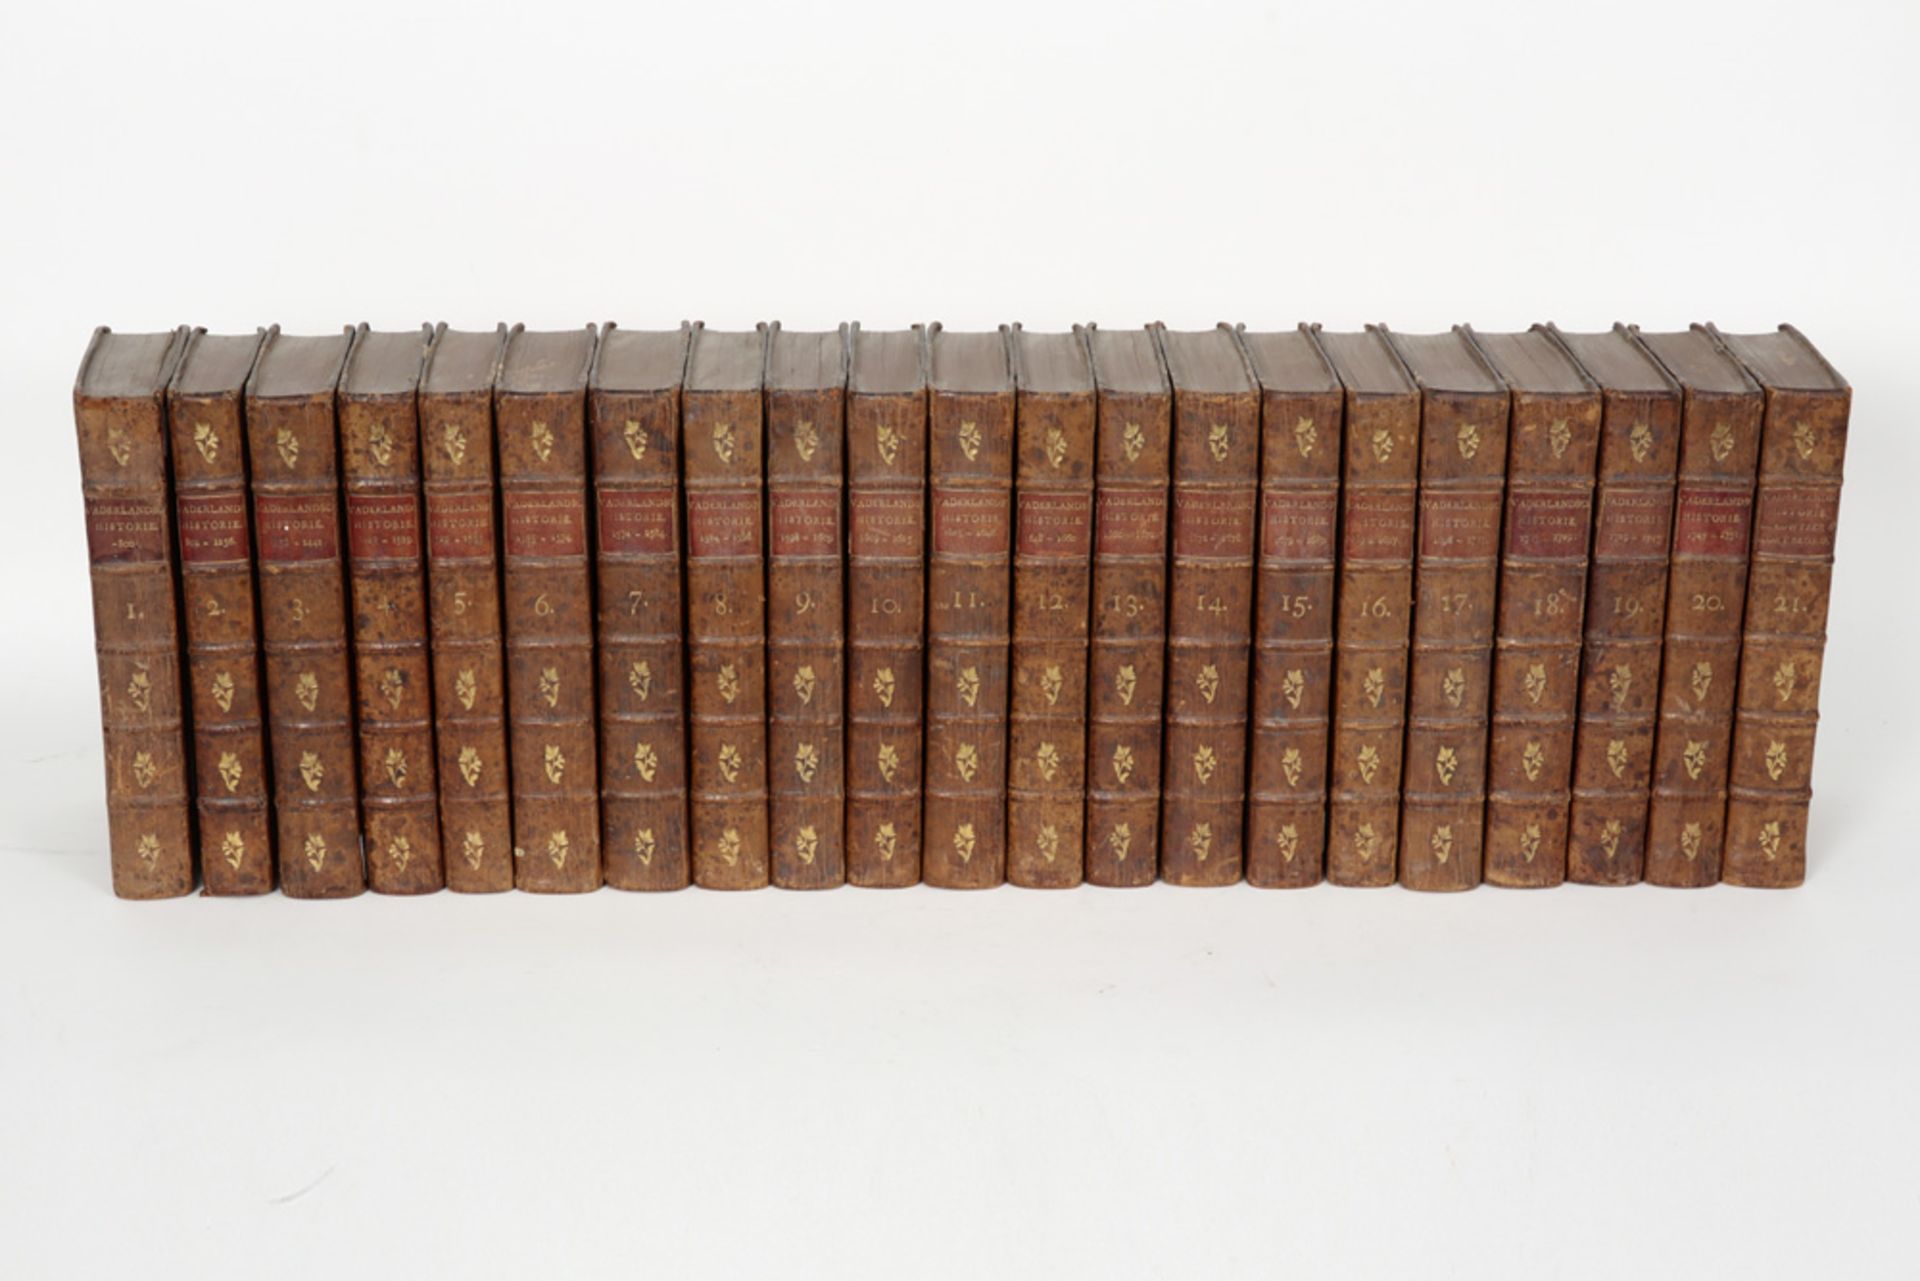 set of 21 "Vaderlandsche Historie" books dated 1770 printed in Amsterdam - with many original